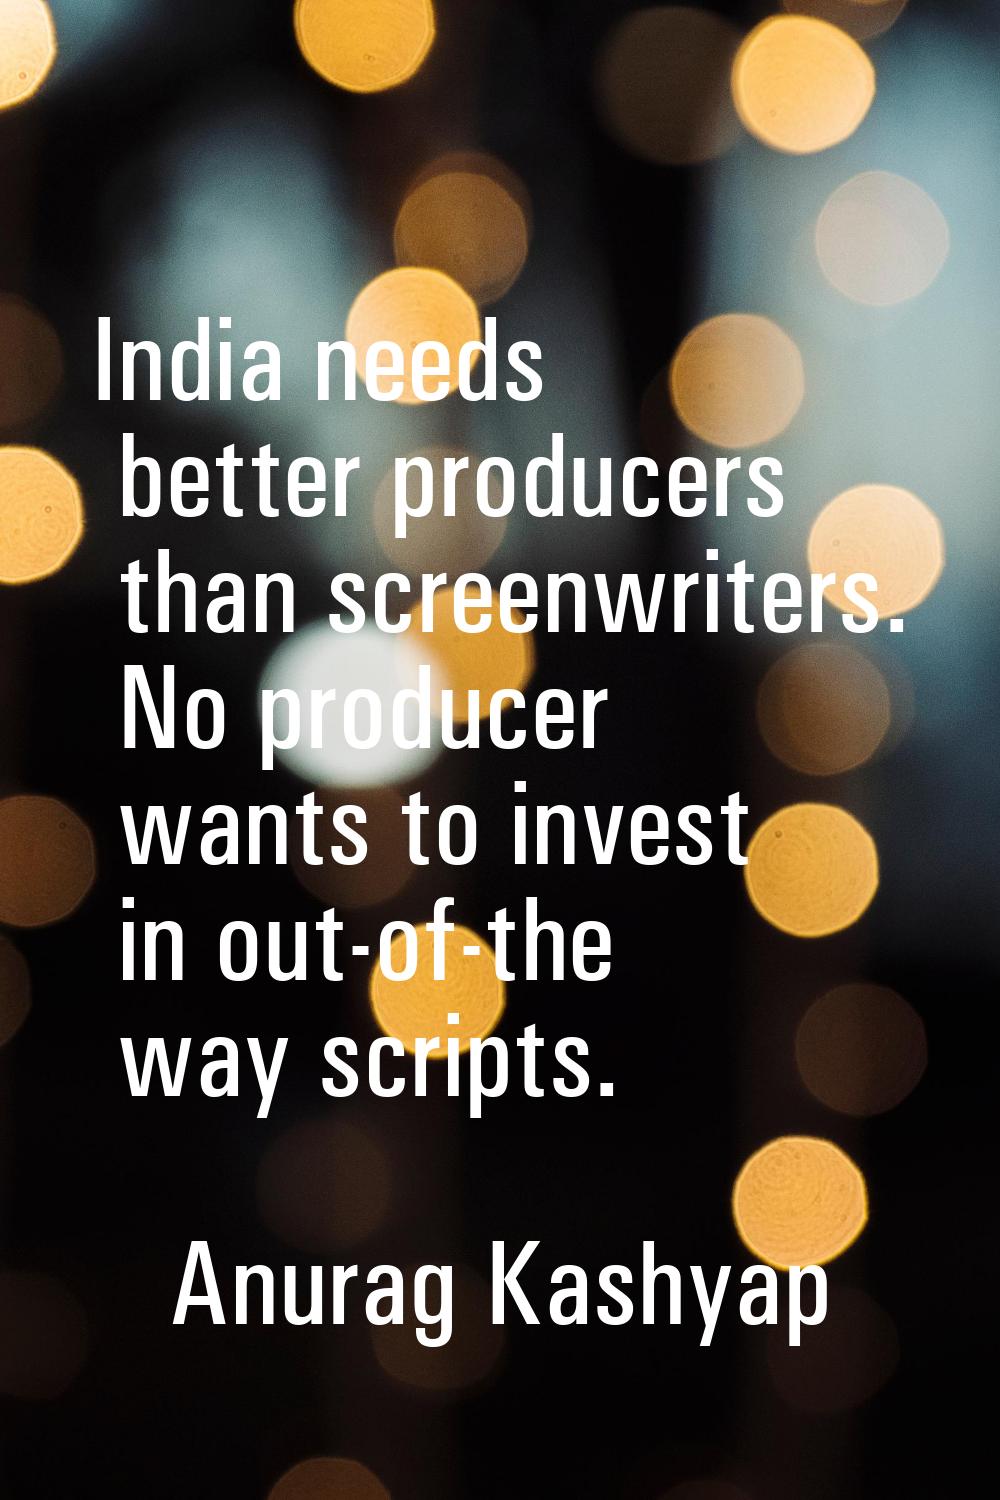 India needs better producers than screenwriters. No producer wants to invest in out-of-the way scri